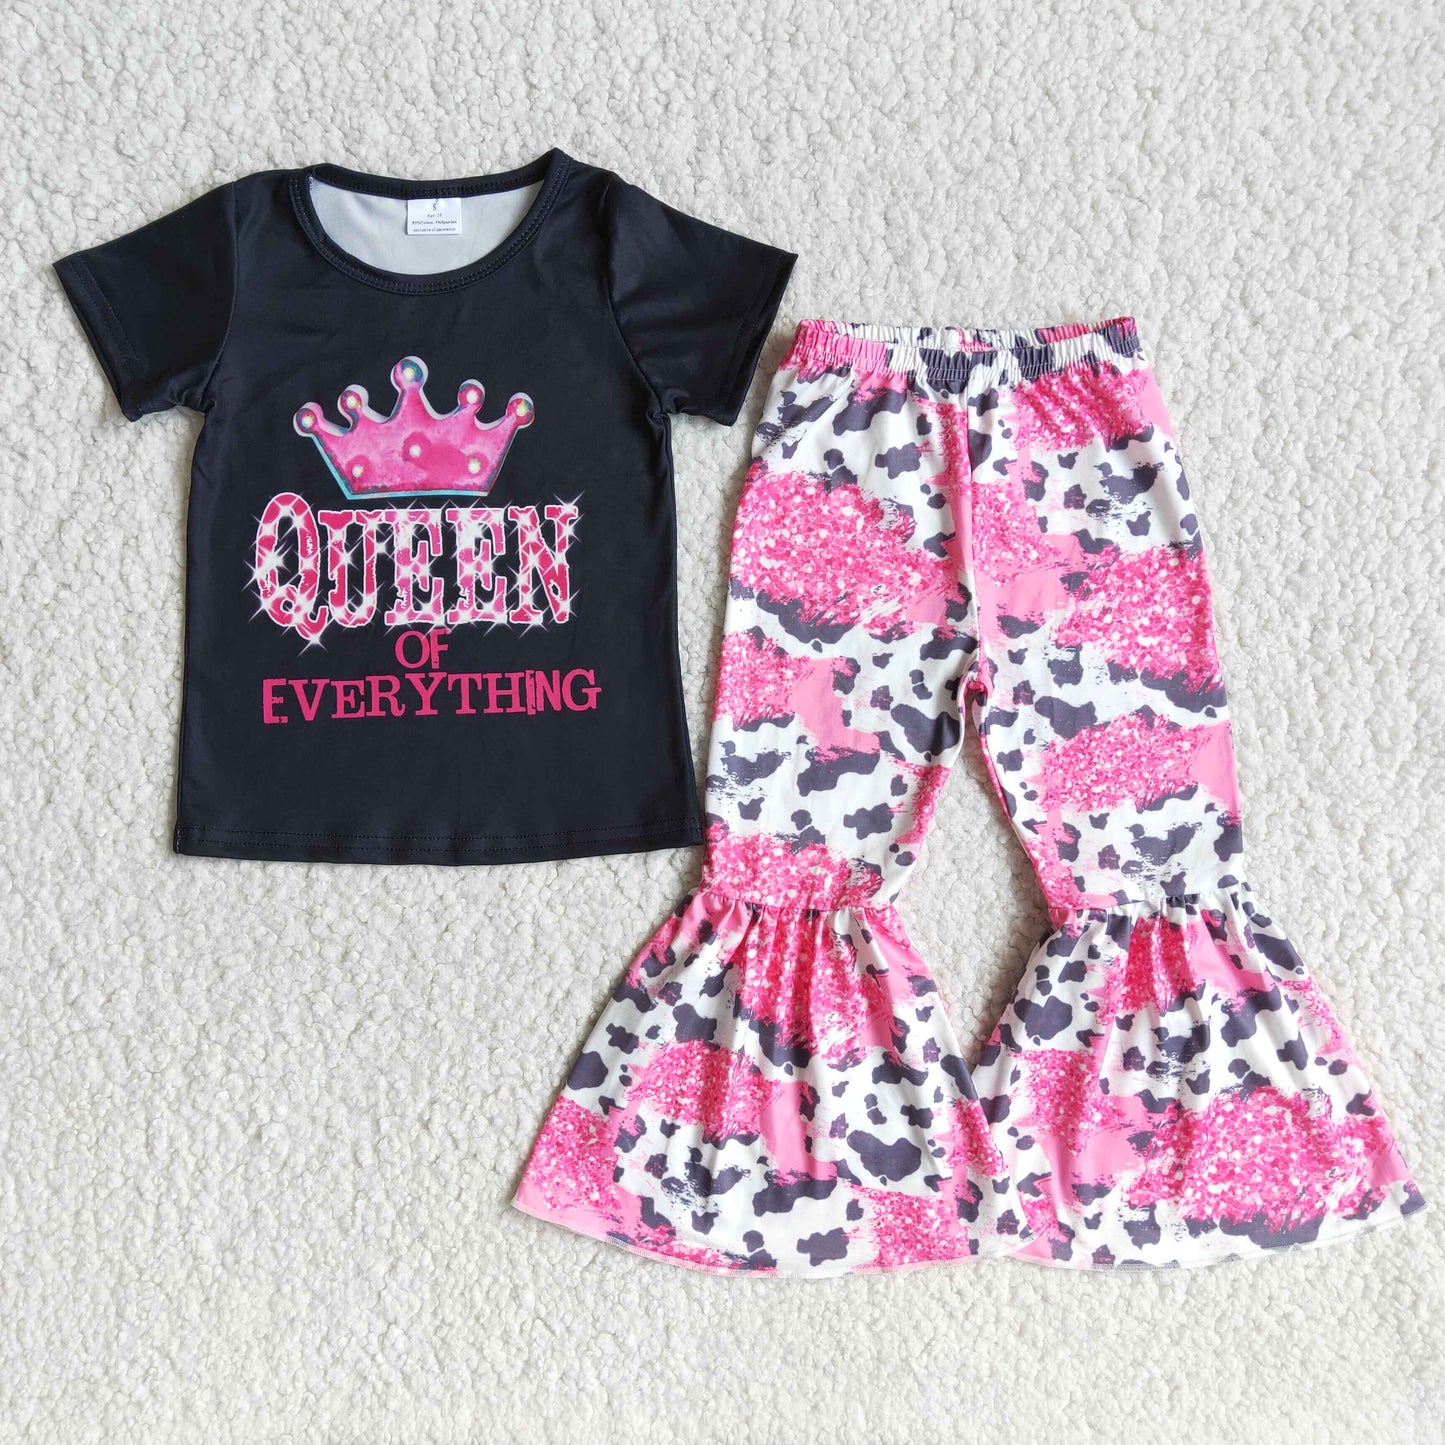 Queen of everything leopard bell bottom pants girls boutique clothing